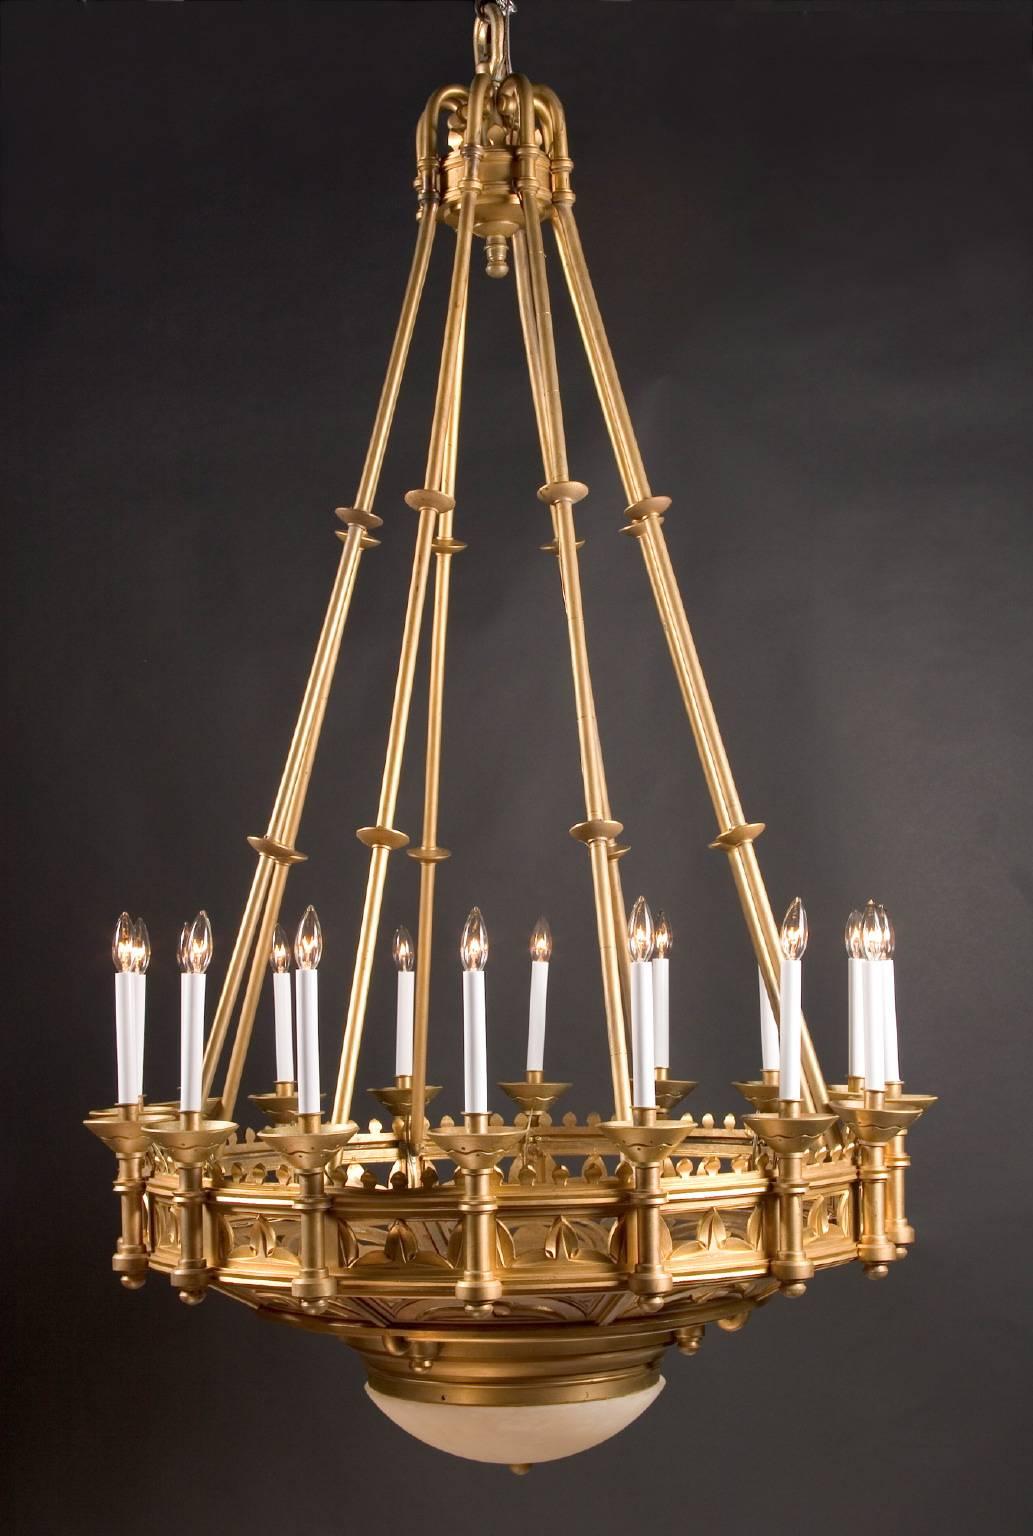 Originally made for gas, this antique gasolier creates a striking visual presence with the simple-yet-elegant designs cut into the bronze. Note the pattern cut into the base of the bobeches. The chandelier is made of solid bronze, with bronze tubes